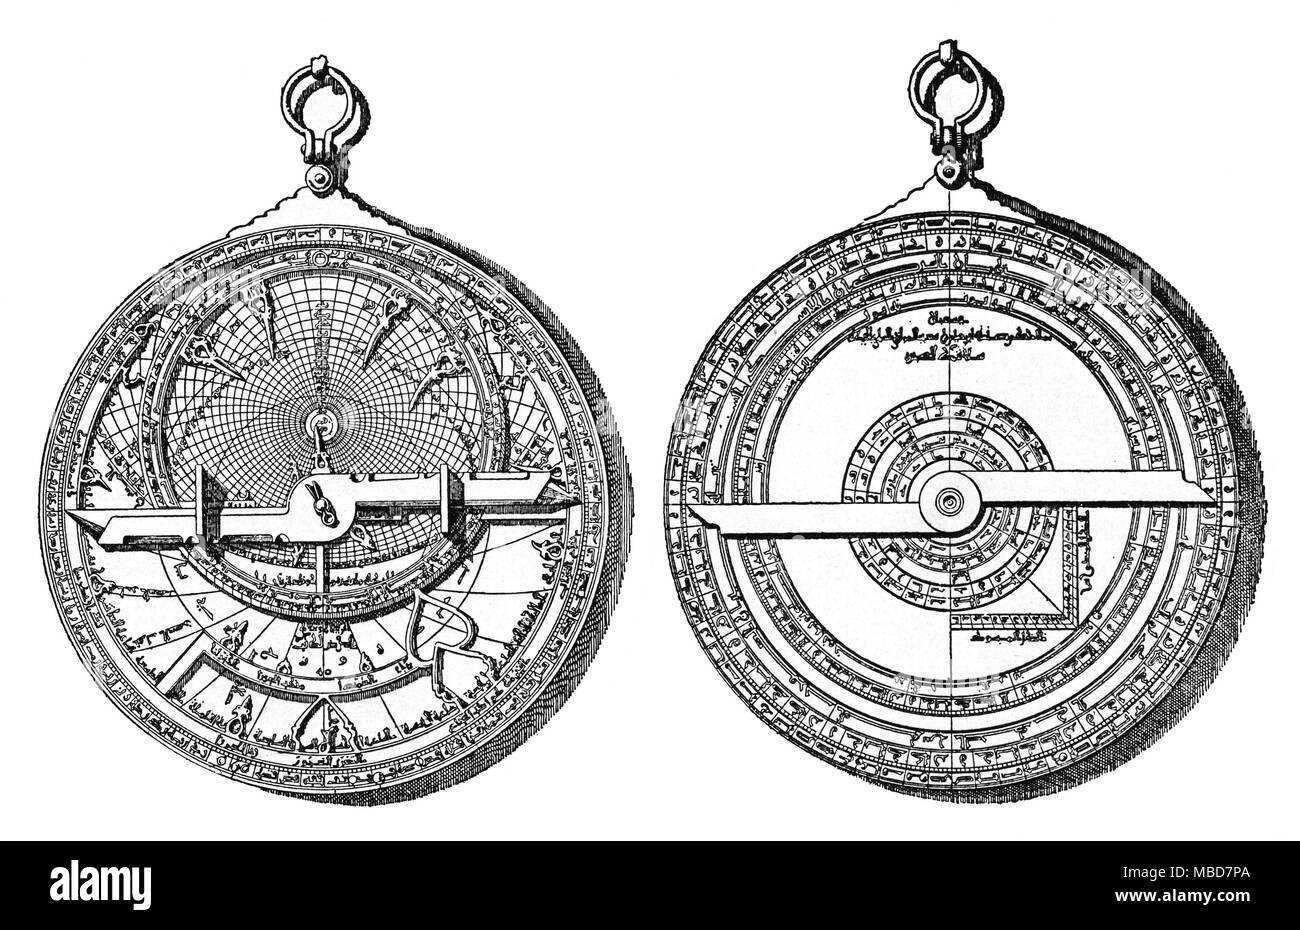 ASTROLABES Arabian astrolabe - wood-engraving from Stanley Lane-Poole, The Barbary Corsairs, 1890. Stock Photo